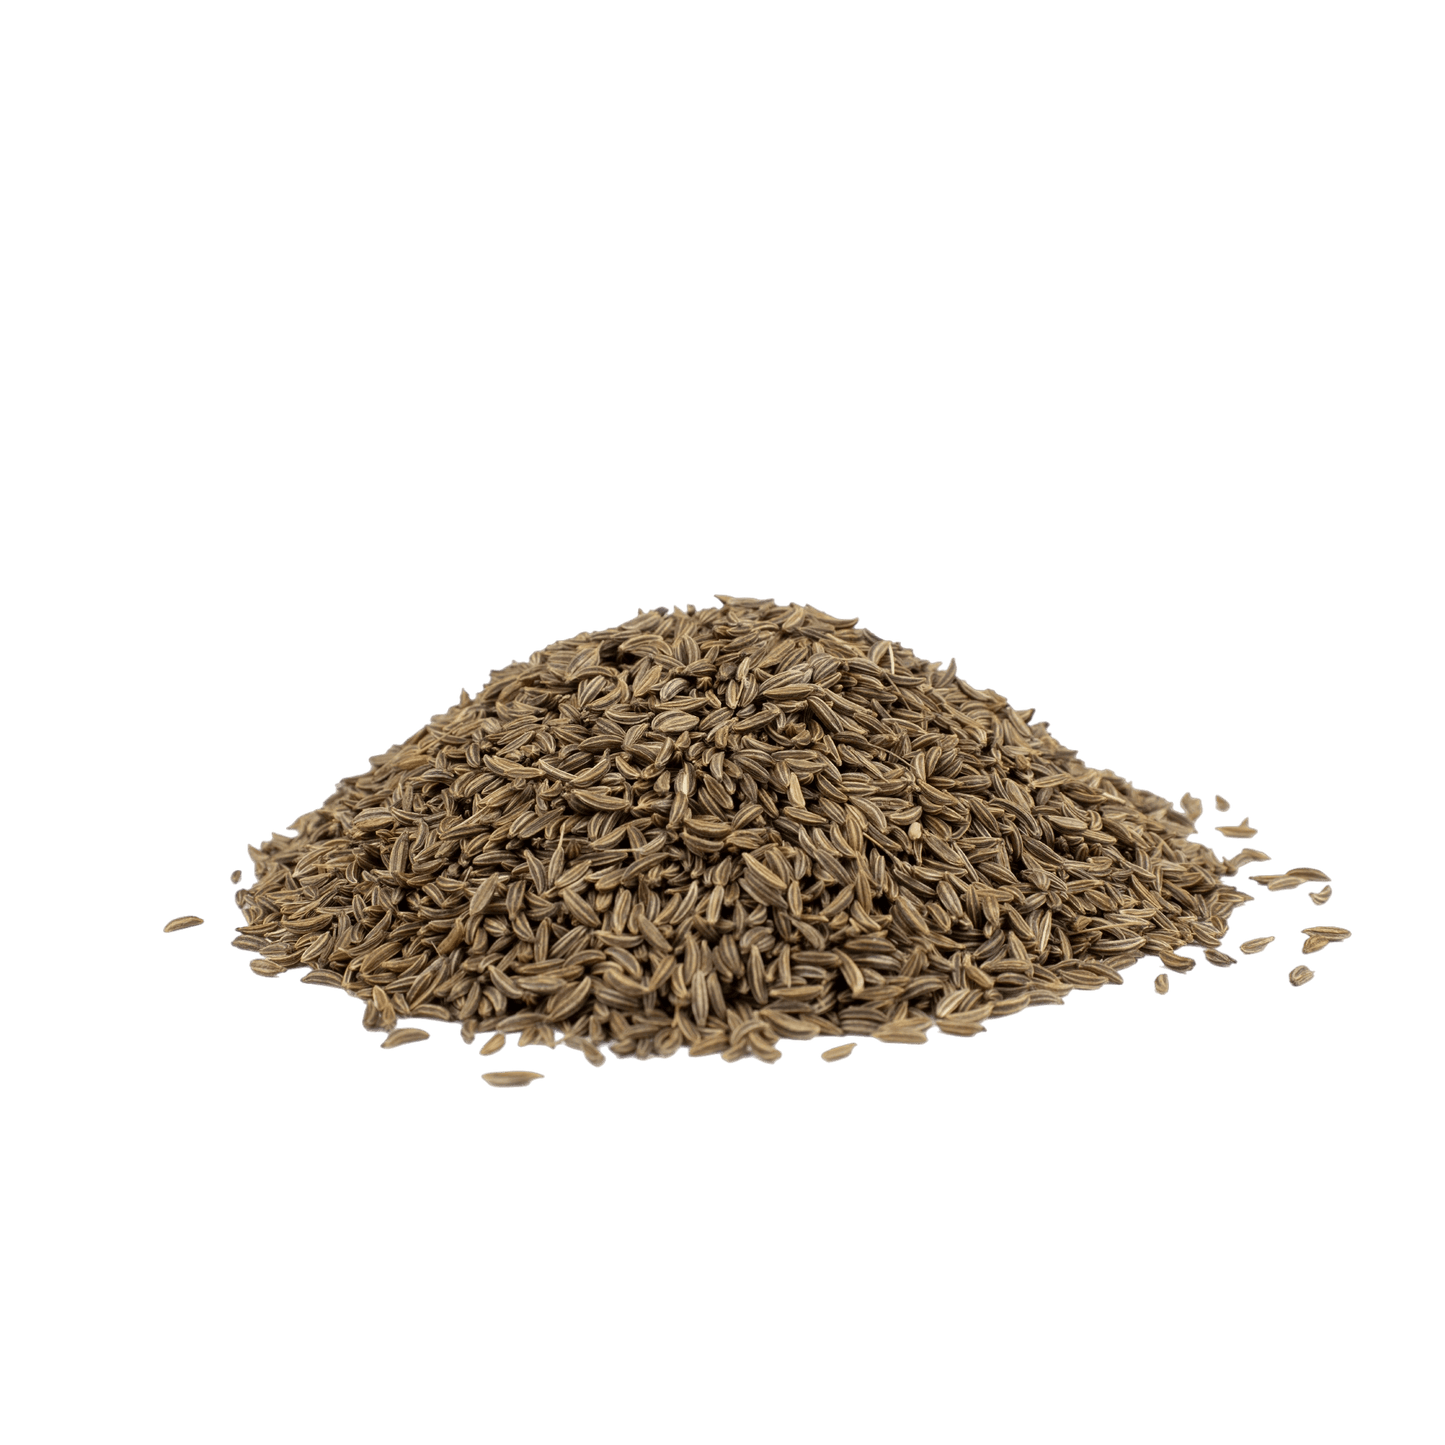 Caraway whole